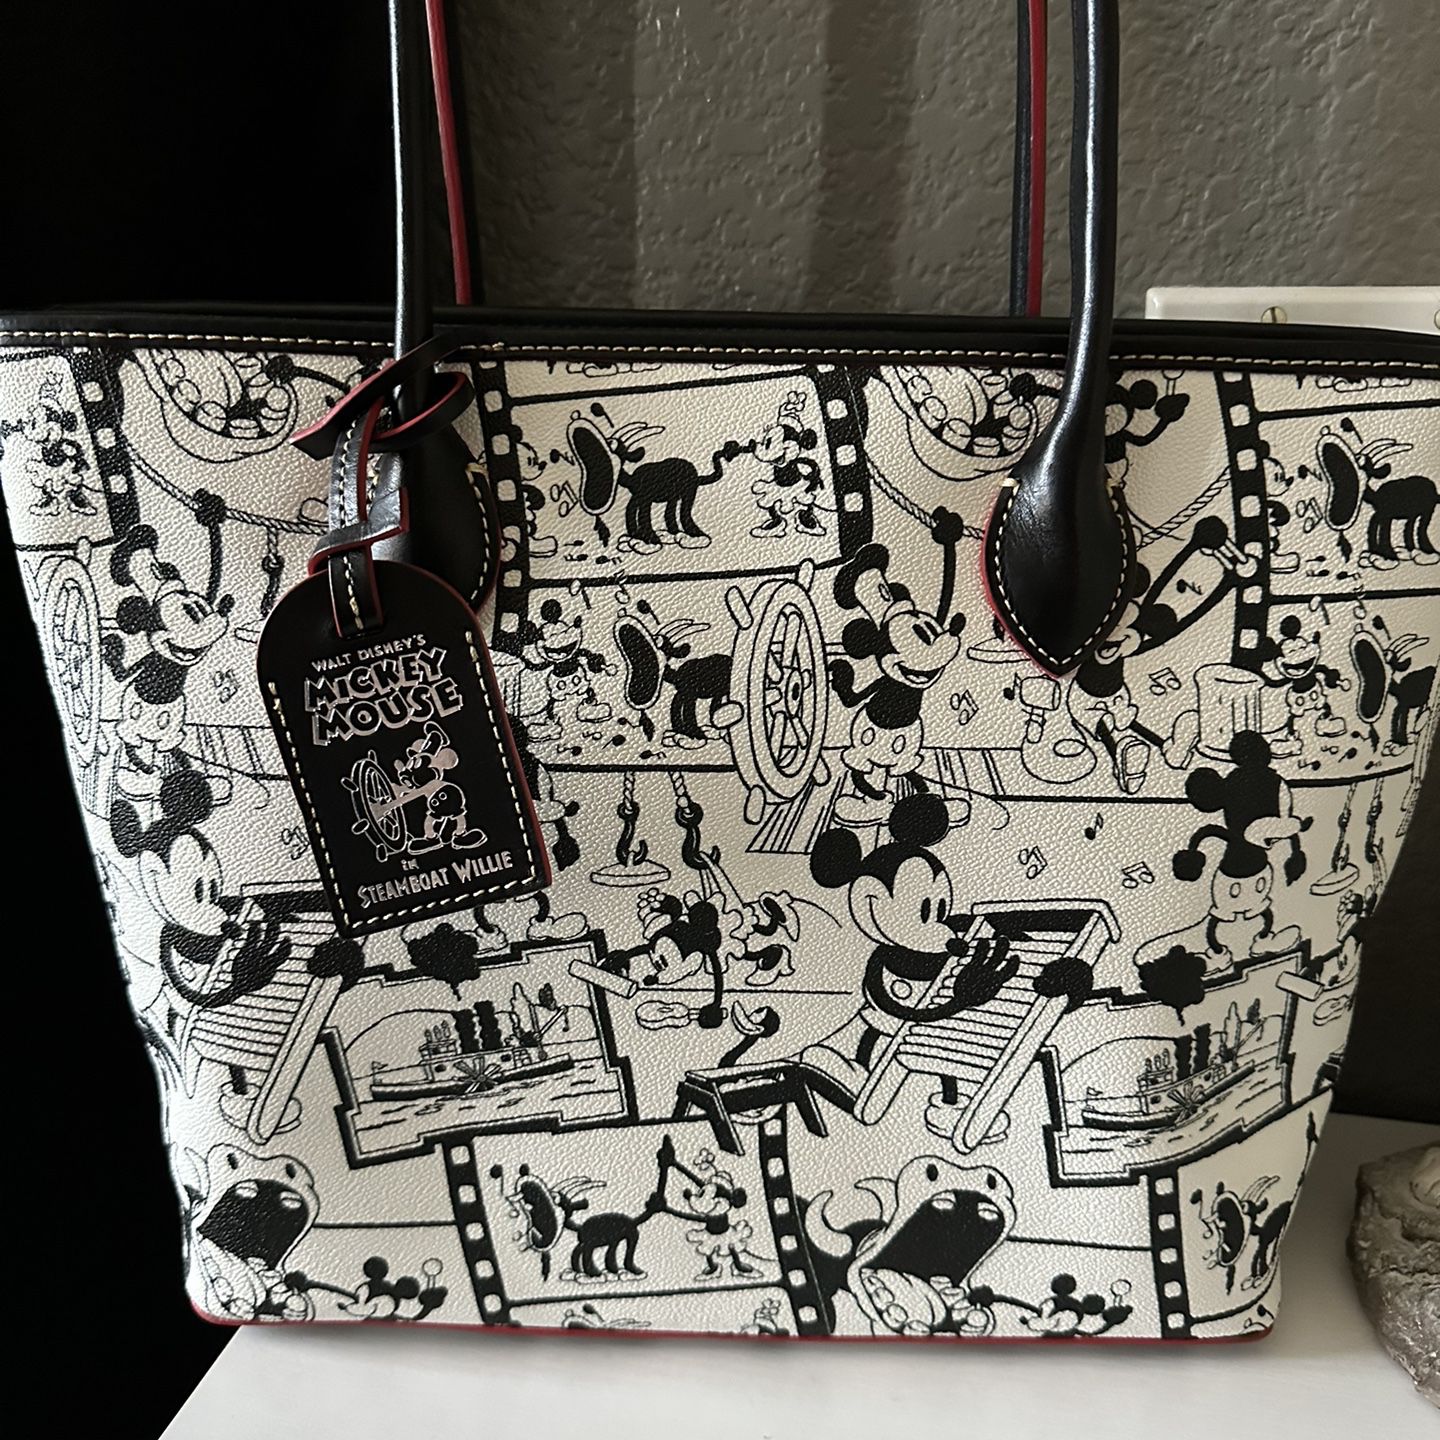 New 'Steamboat Willie' Bags by Dooney & Bourke Available at Walt